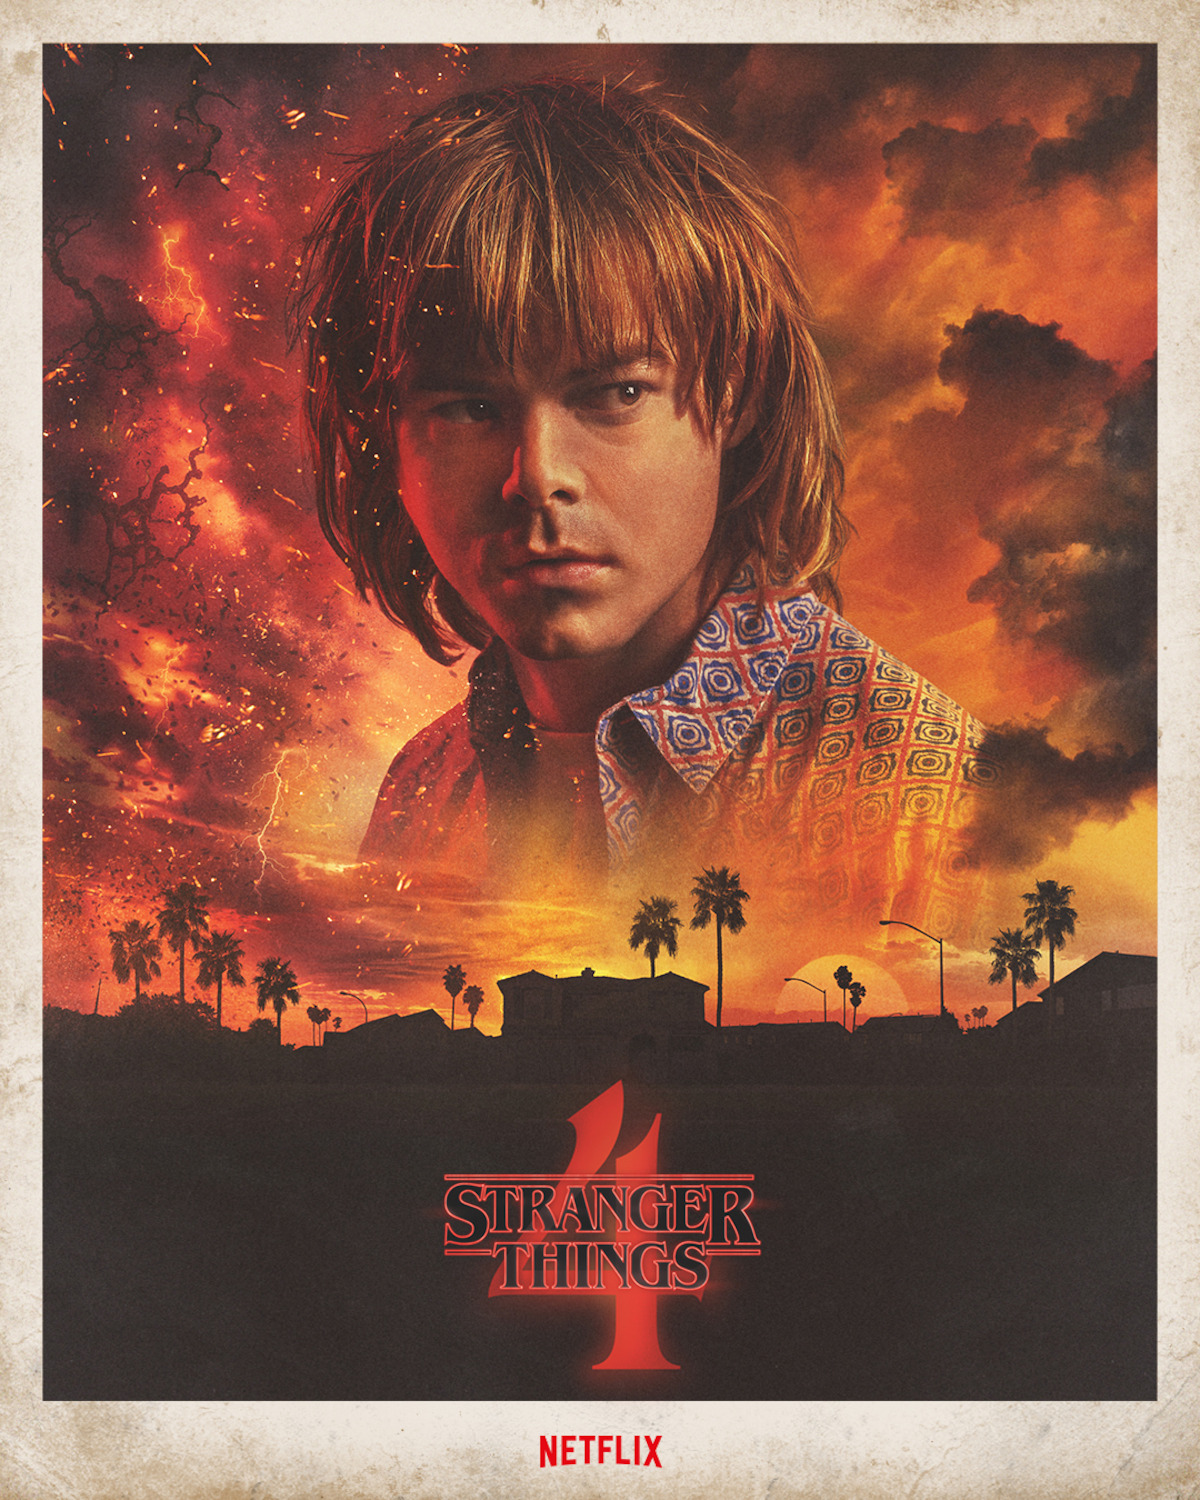 Jonathan - The Byers Family Finds Trouble in California in New ‘Stranger Things 4’ Posters